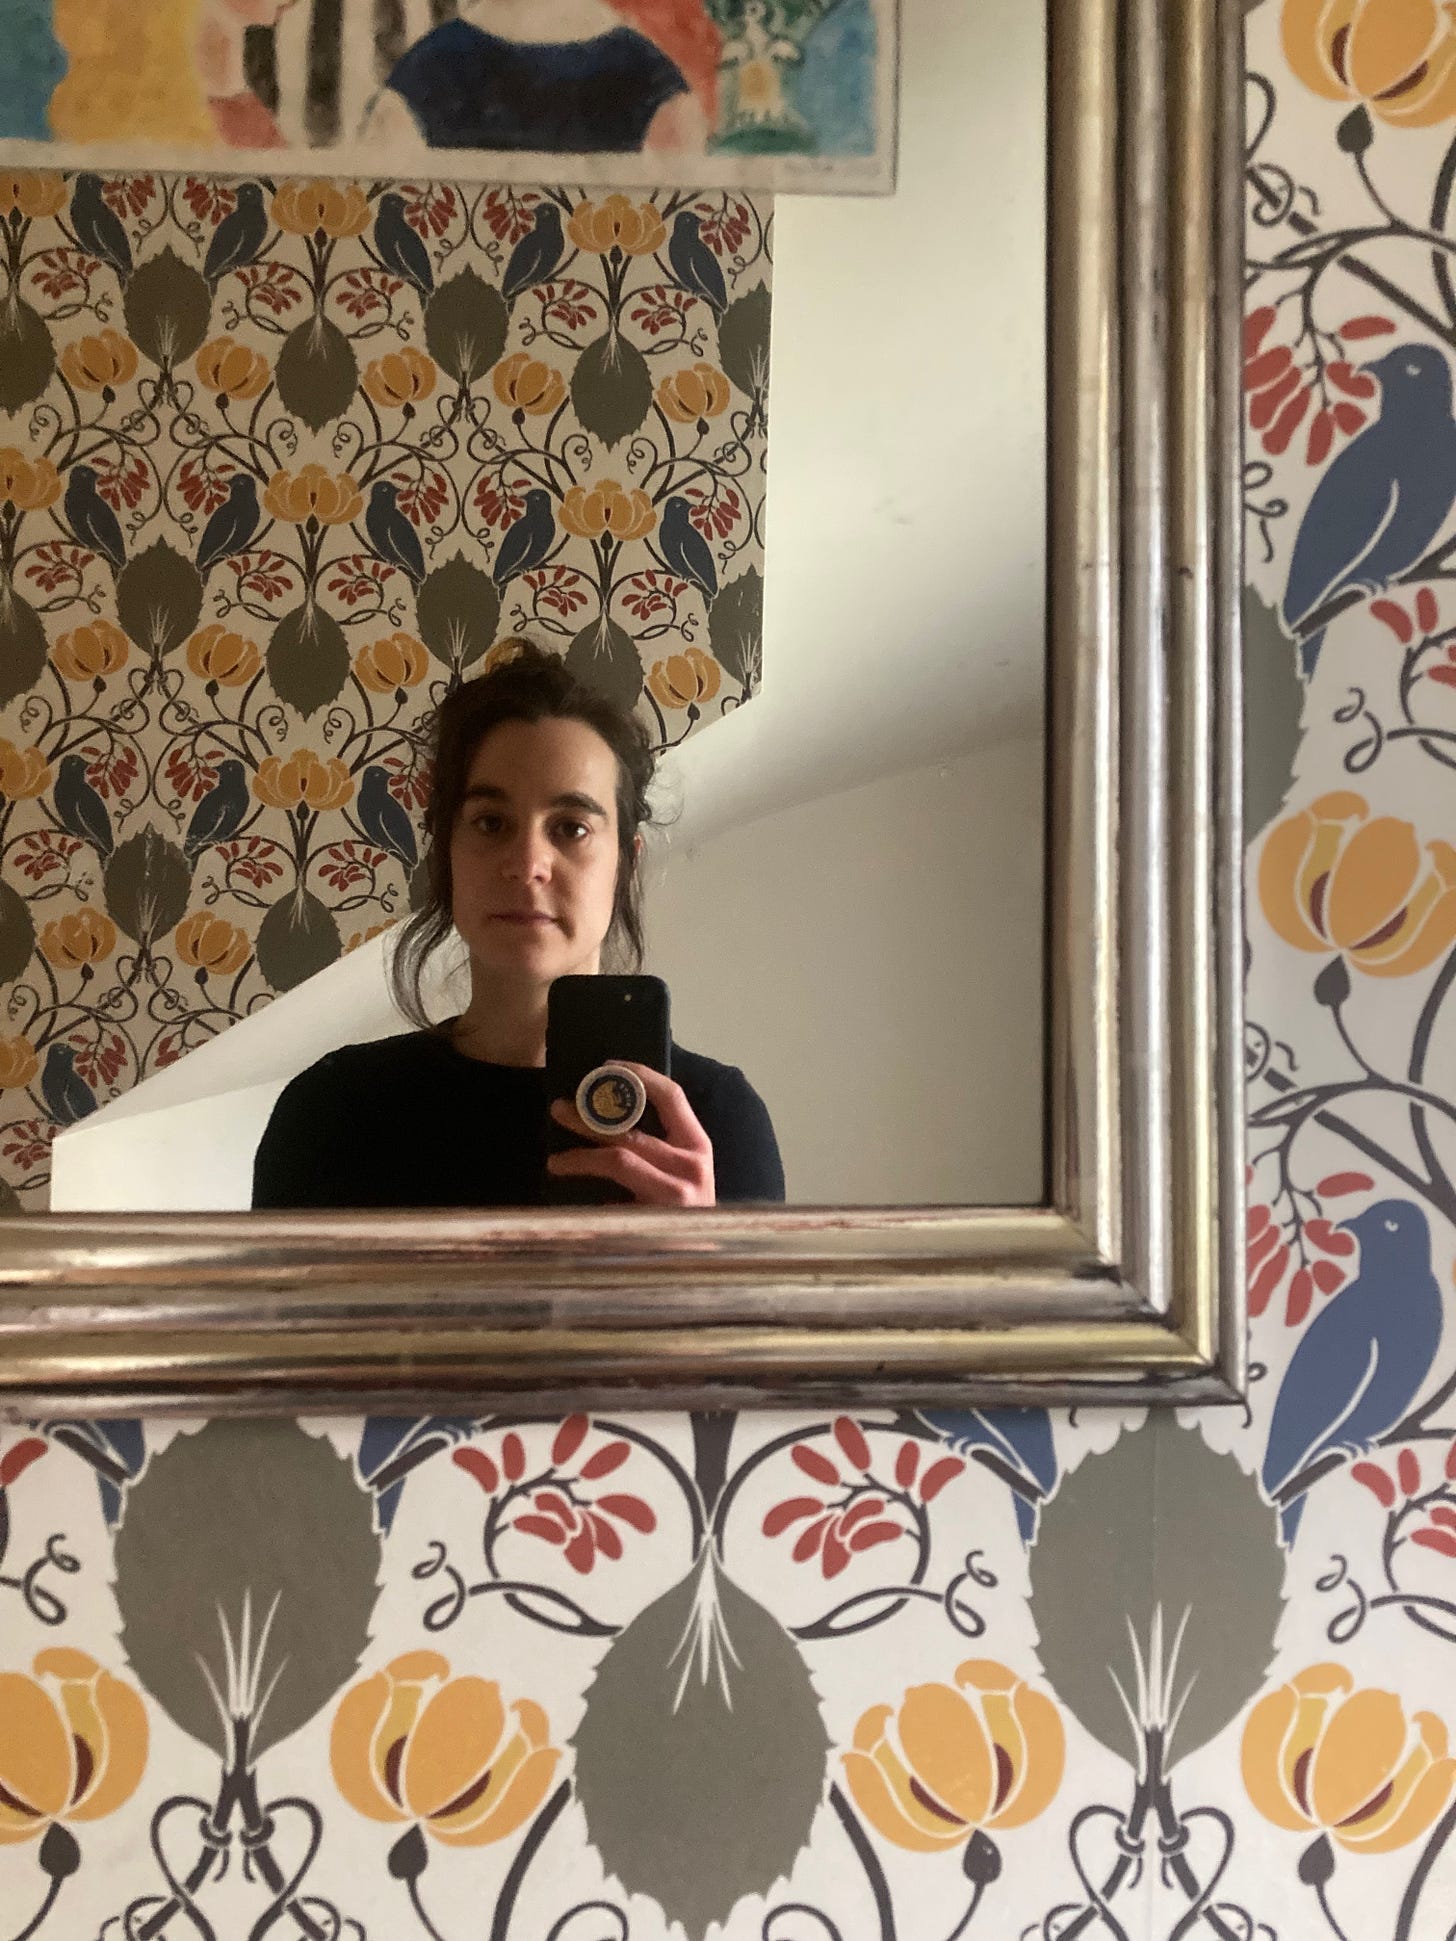 A selfie of siloh looking in a mirror on a wall with antique wallpaper, art deco bird pattern